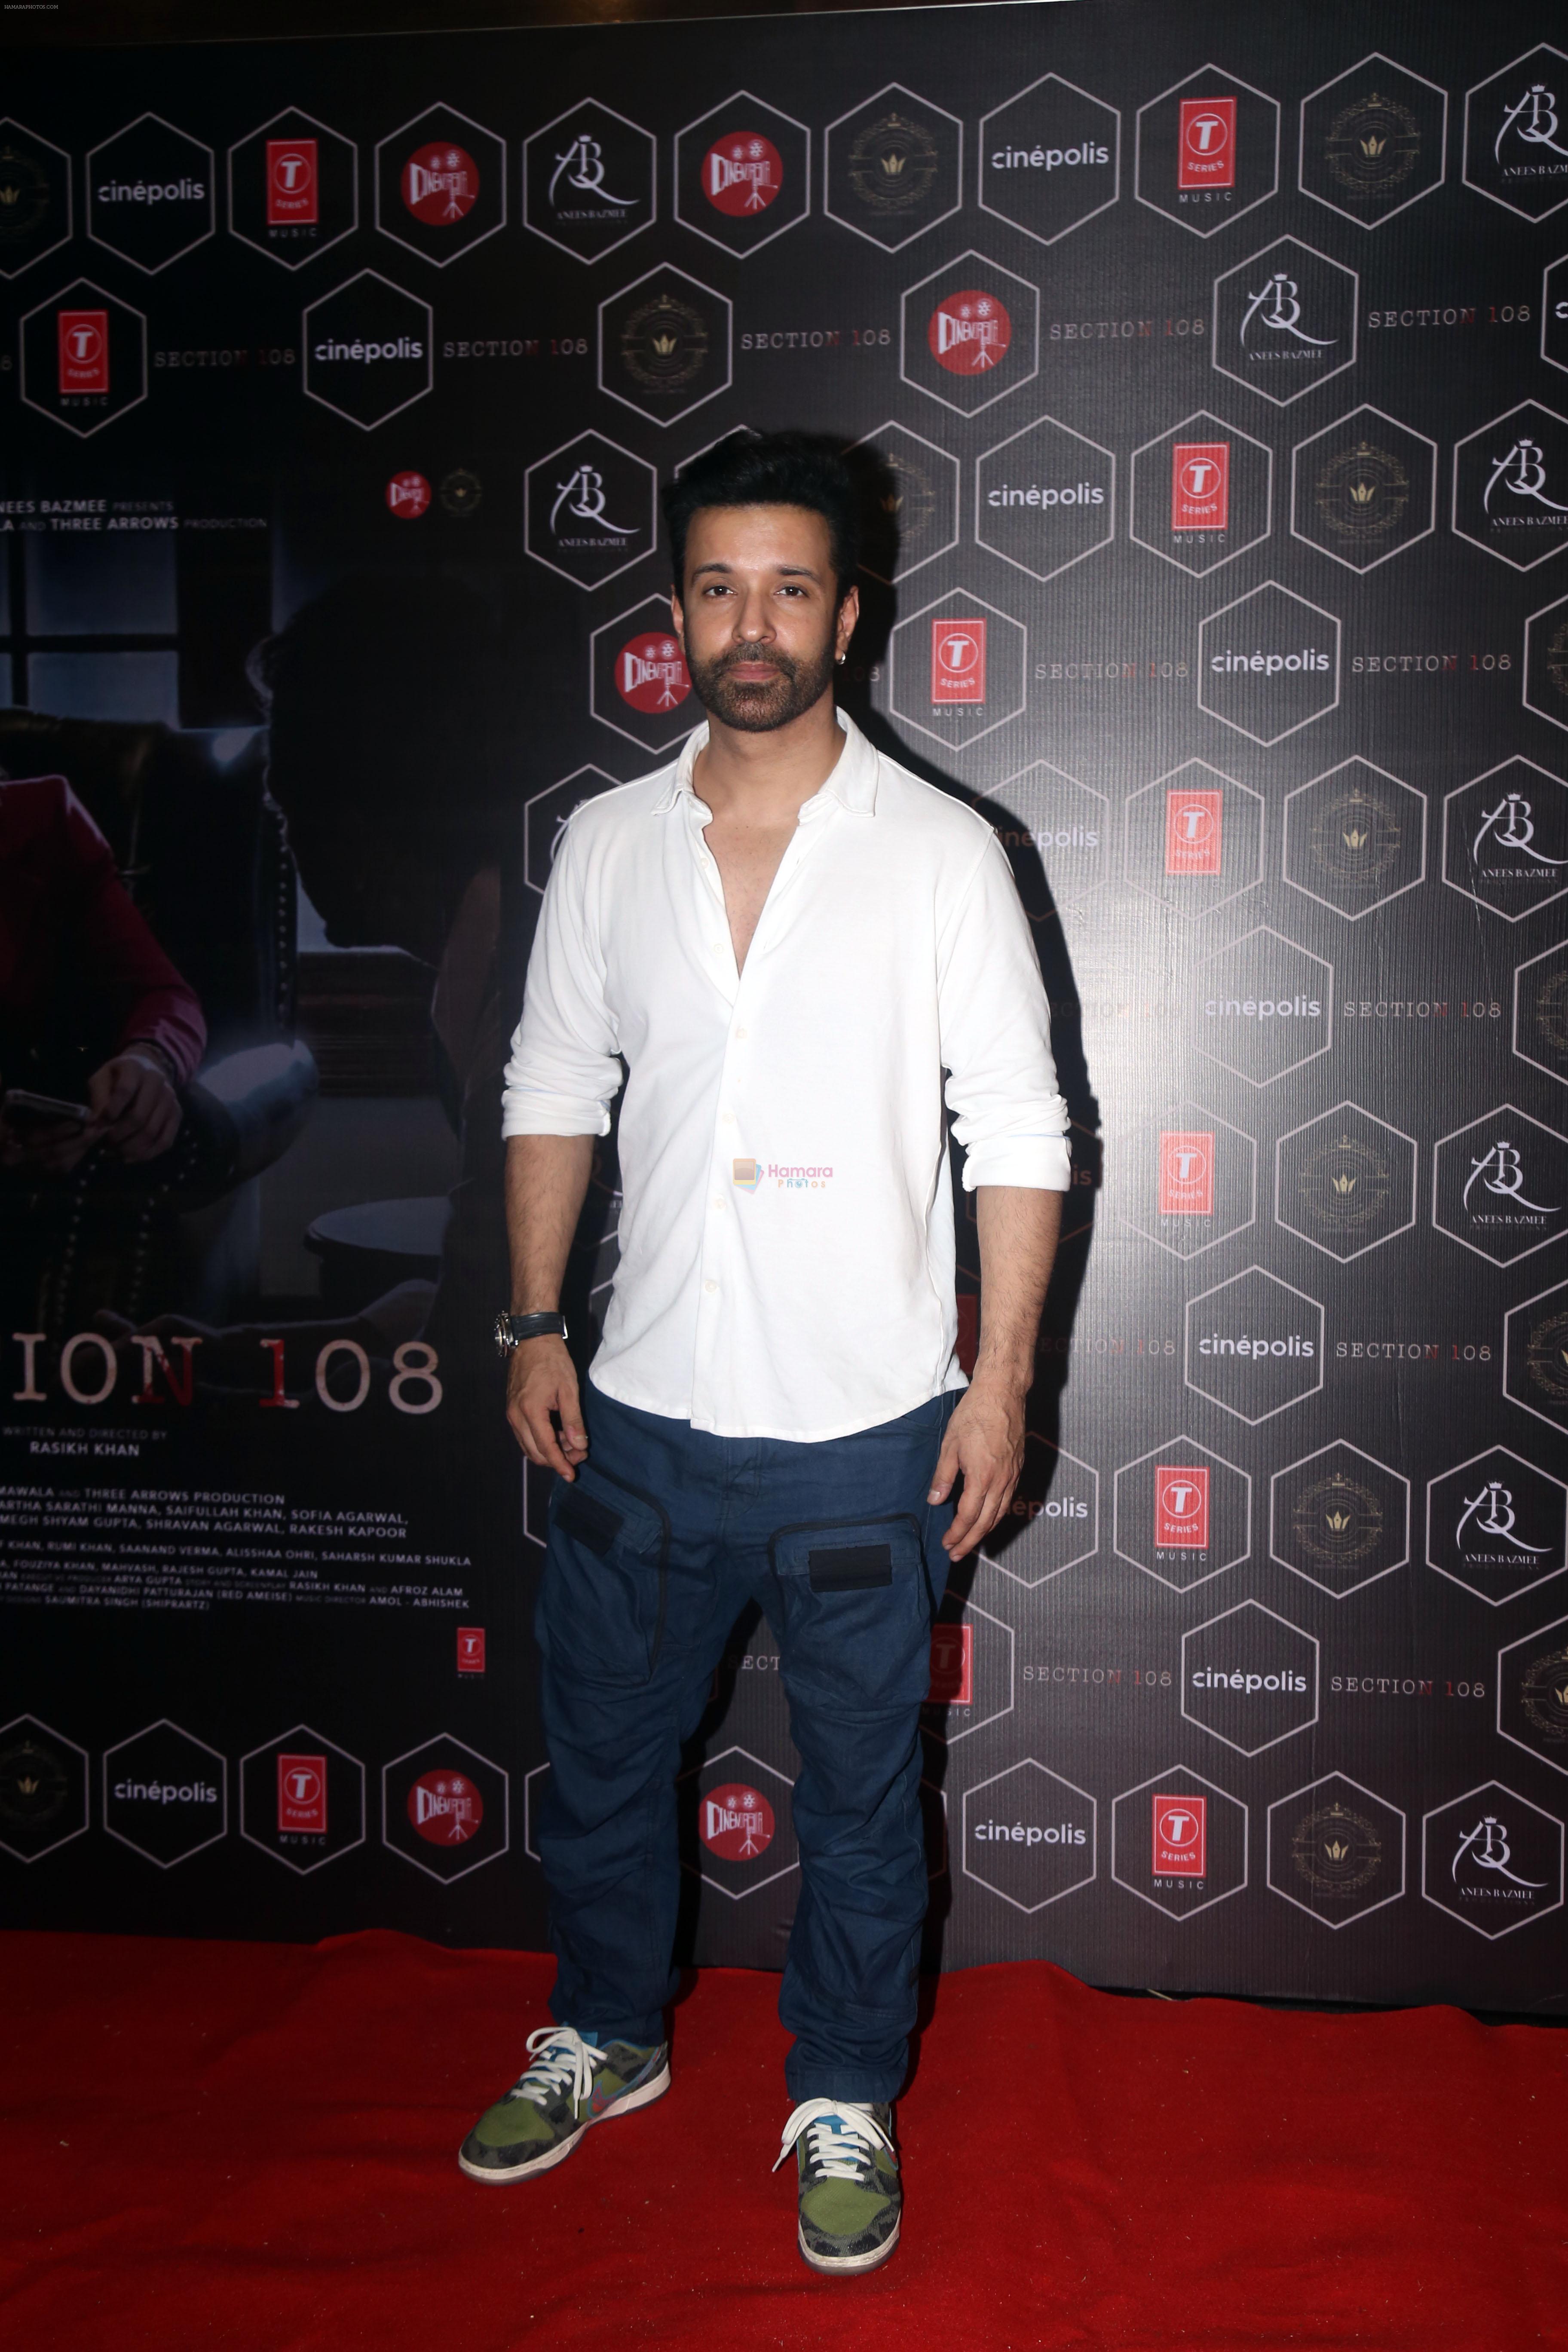 Aamir Ali at the launch of film Section 108 Teaser on 27th August 2023